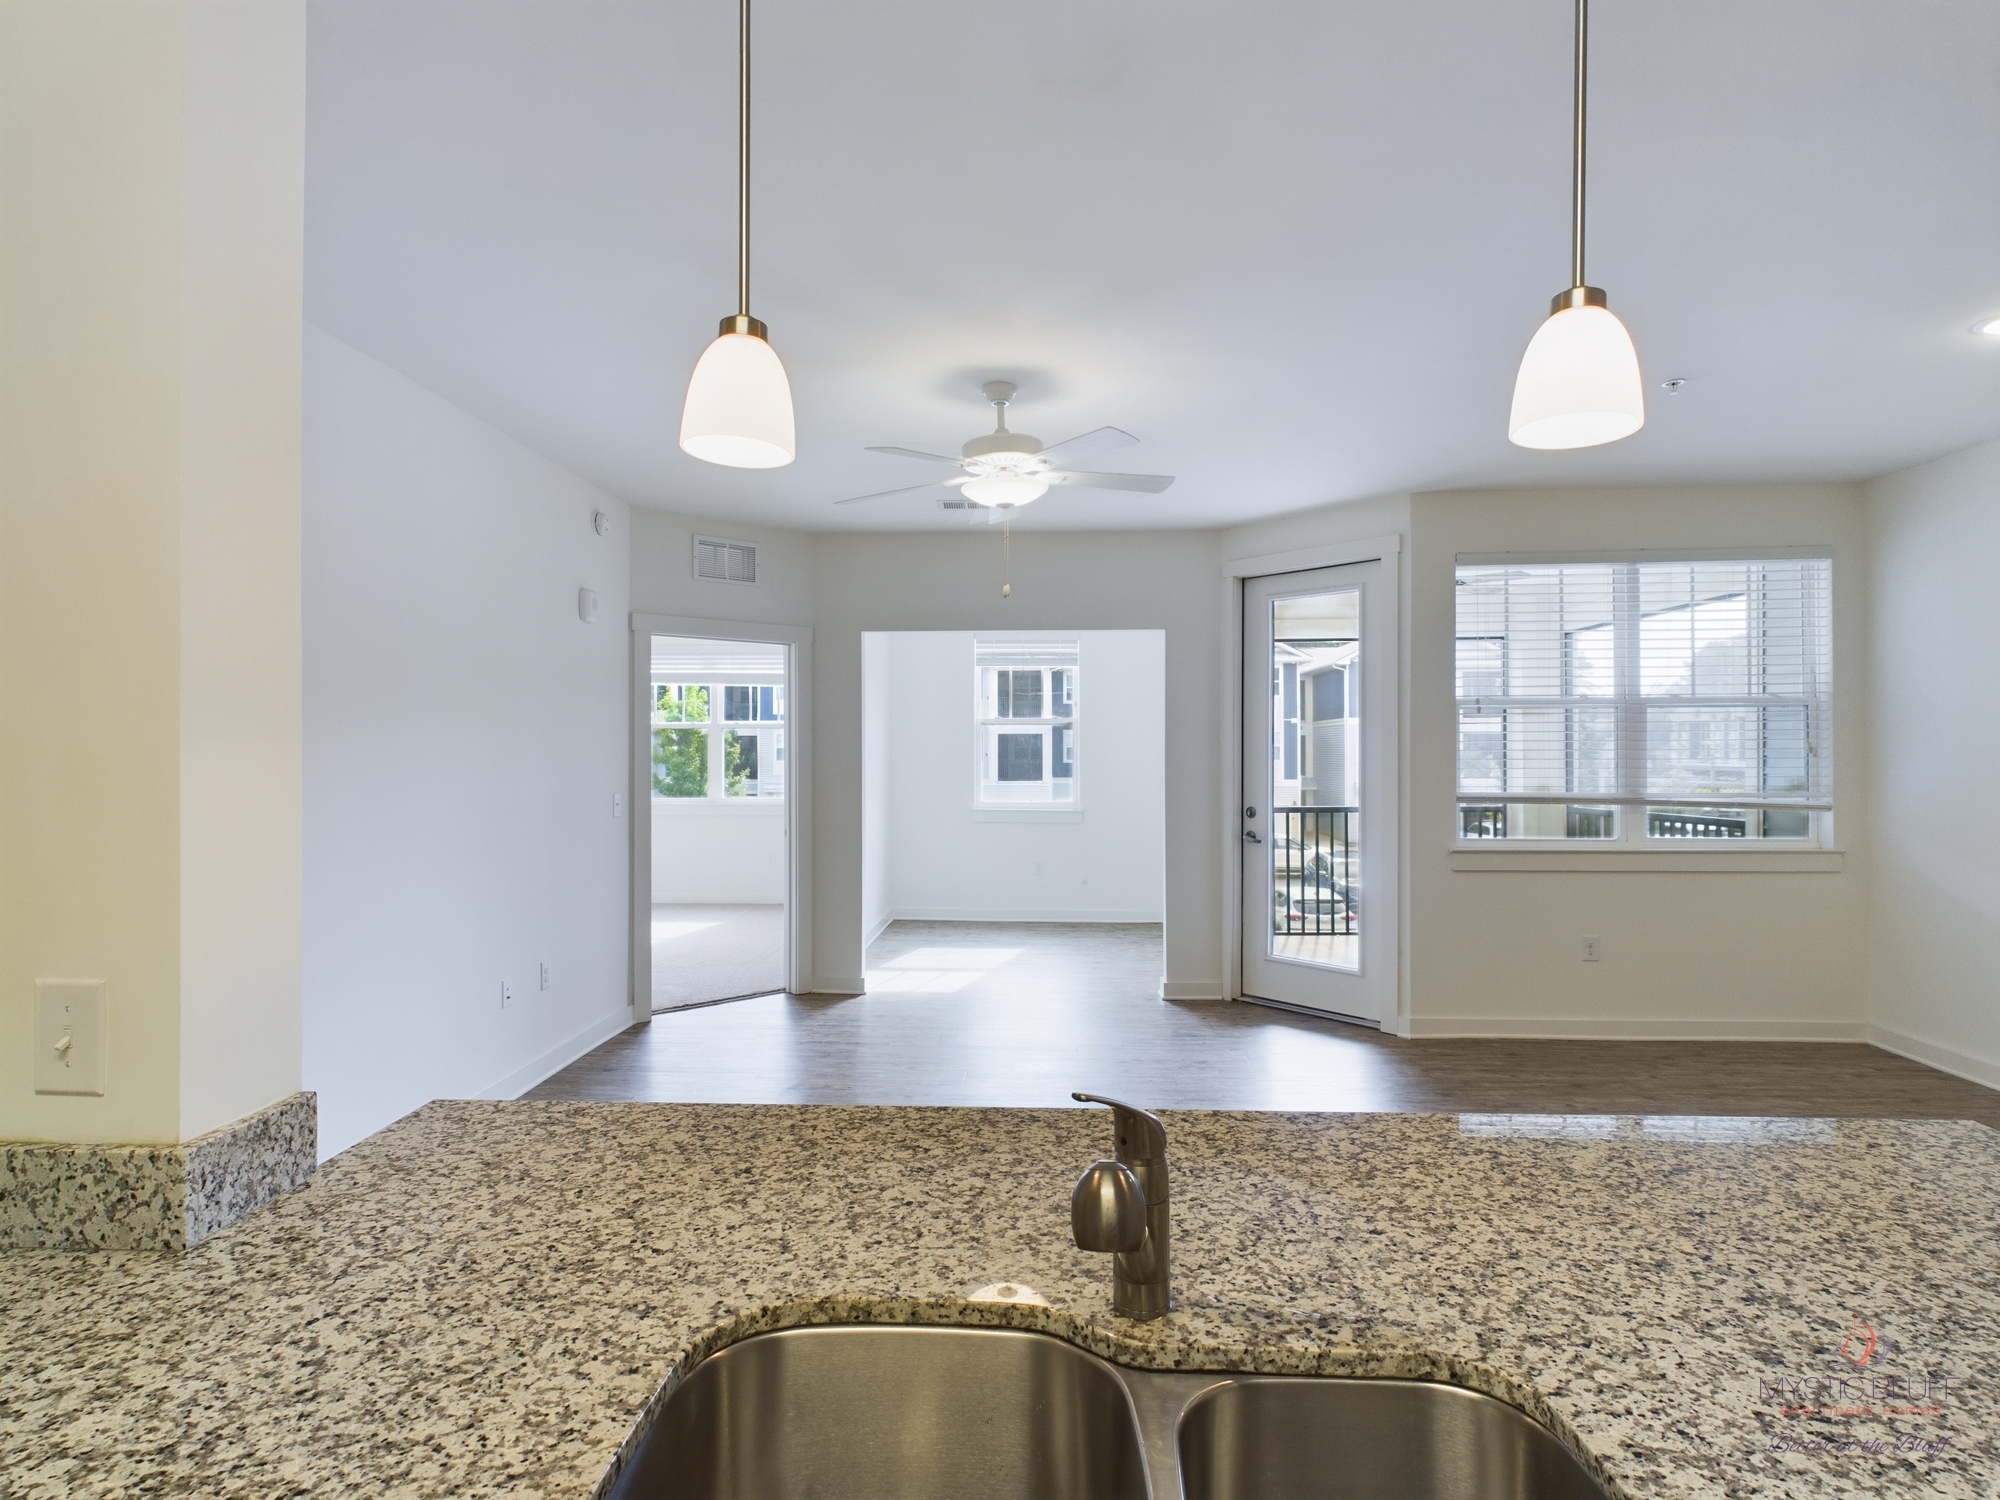 An empty kitchen with granite counter tops and a ceiling fan in one bedroom apartments.